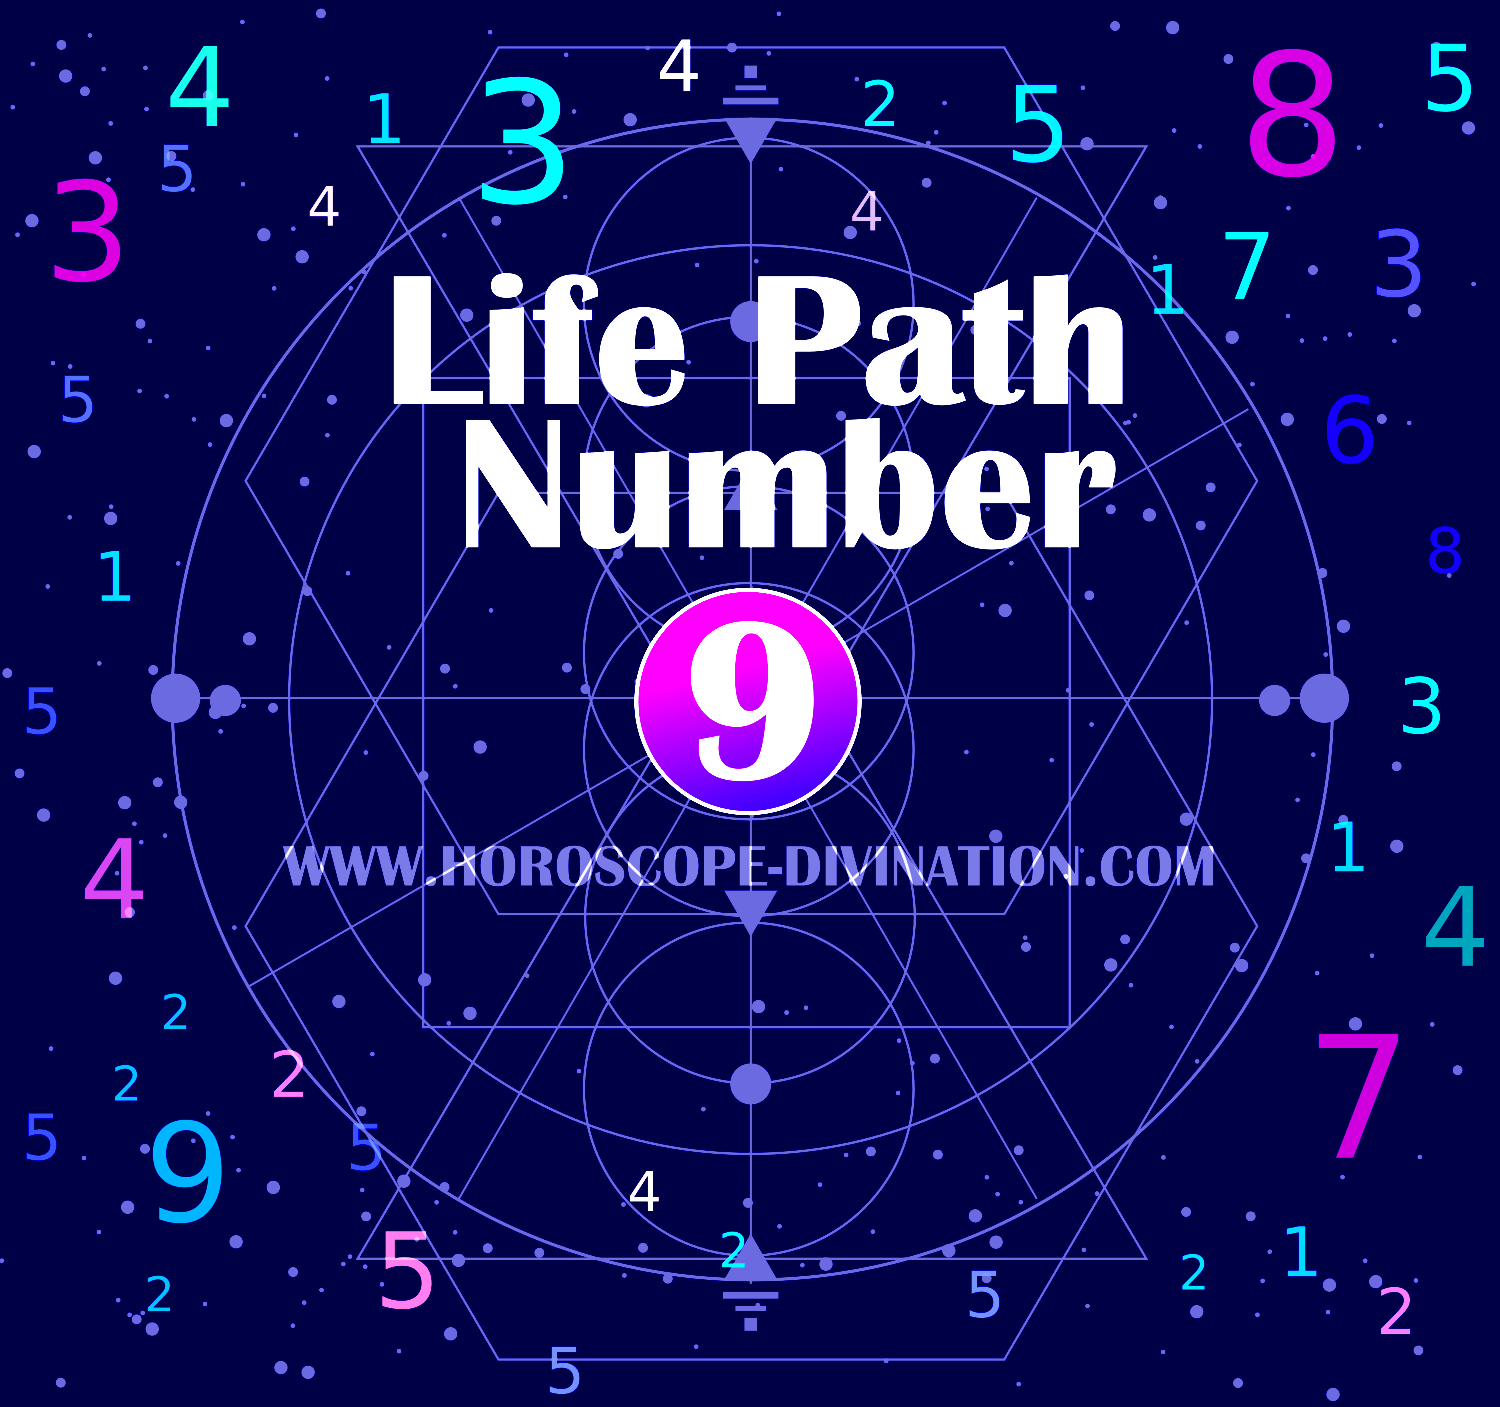 Life Path Number 9 - Numerology